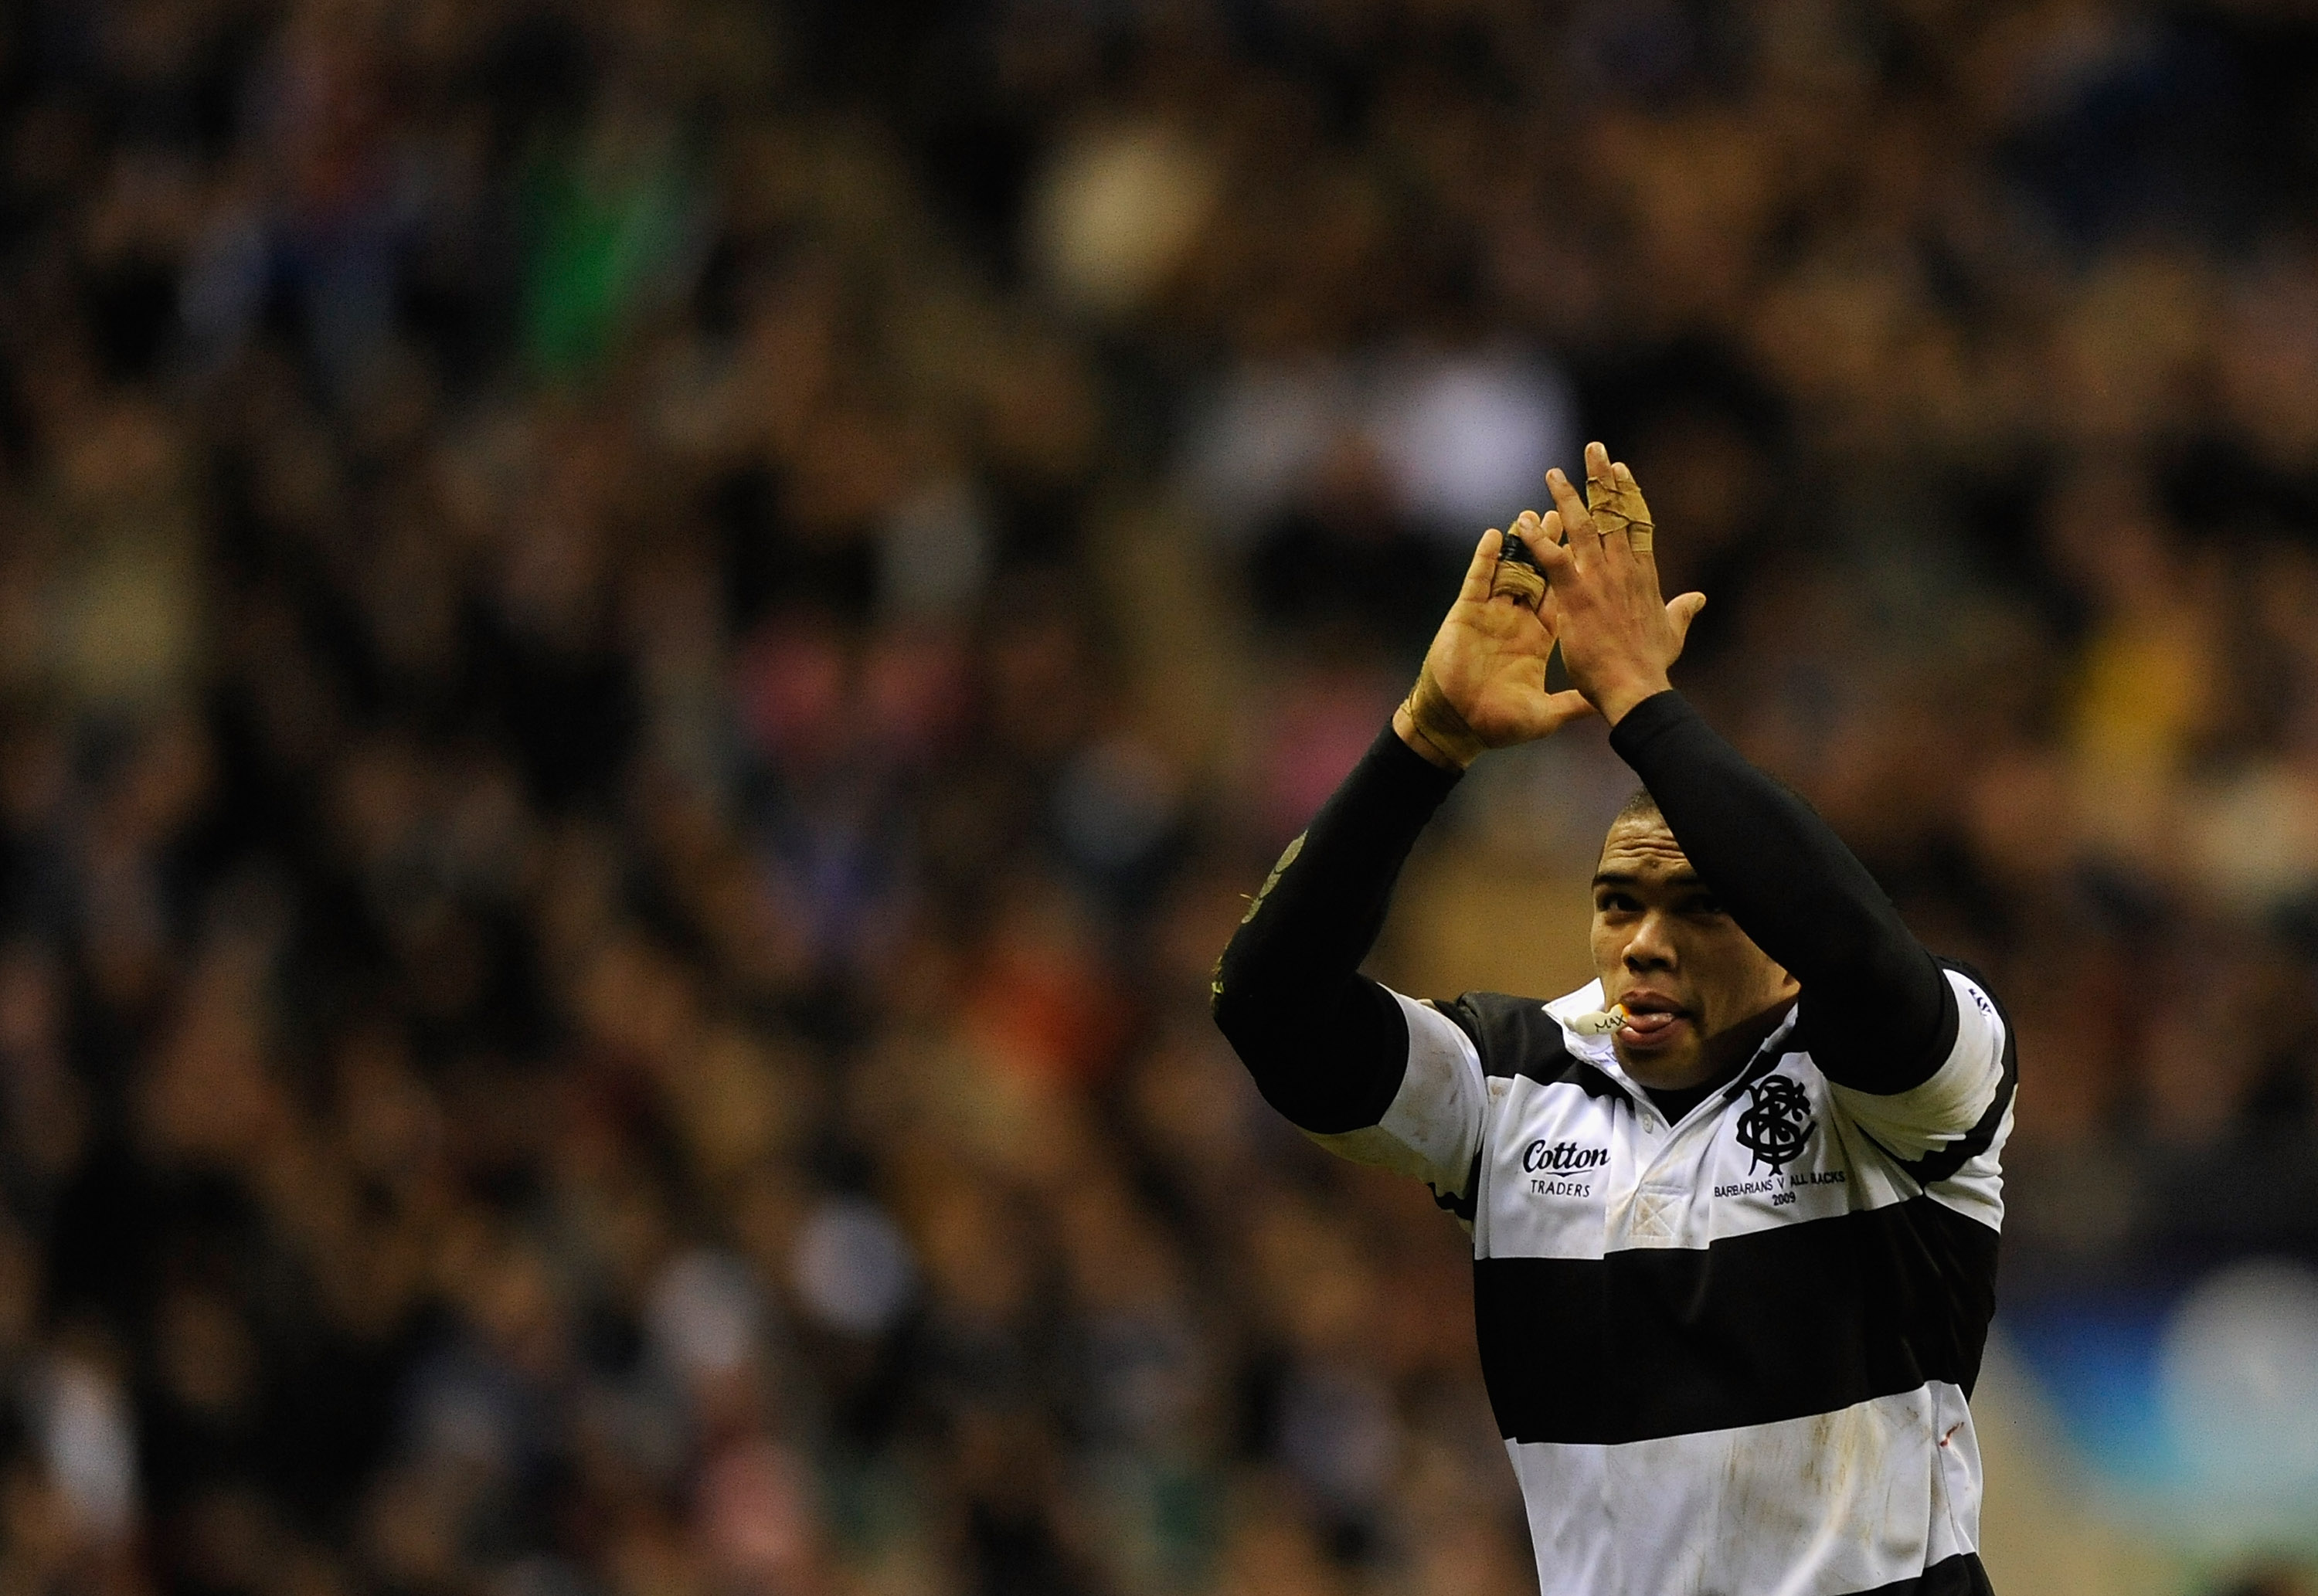 LONDON, ENGLAND - DECEMBER 05: Bryan Habana of the Barbarians applauds spectators during the MasterCard Trophy match between Barbarians and New Zealand at Twickenham Stadium on December 5, 2009 in London, England. (Photo by Jamie McDonald/Getty Images)